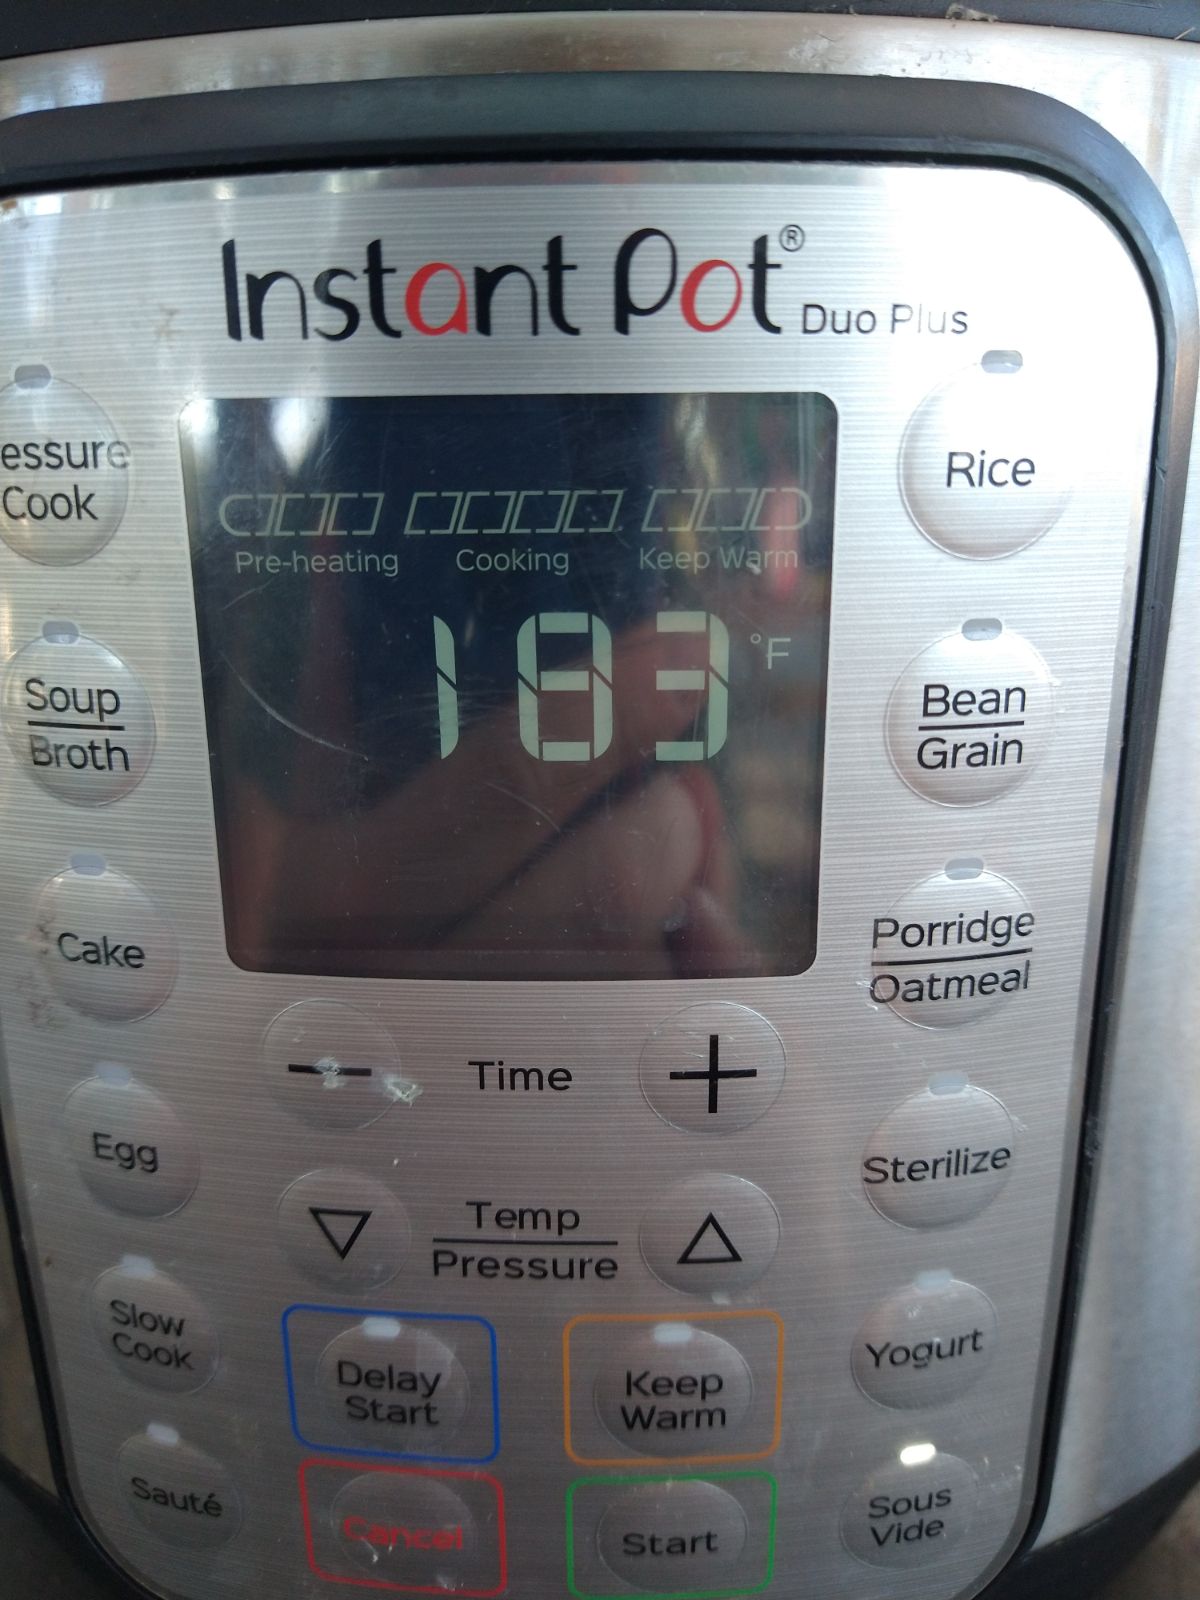 The Instant Pot Duo Plus set to 183 degrees with the sous vide function button pushed. 